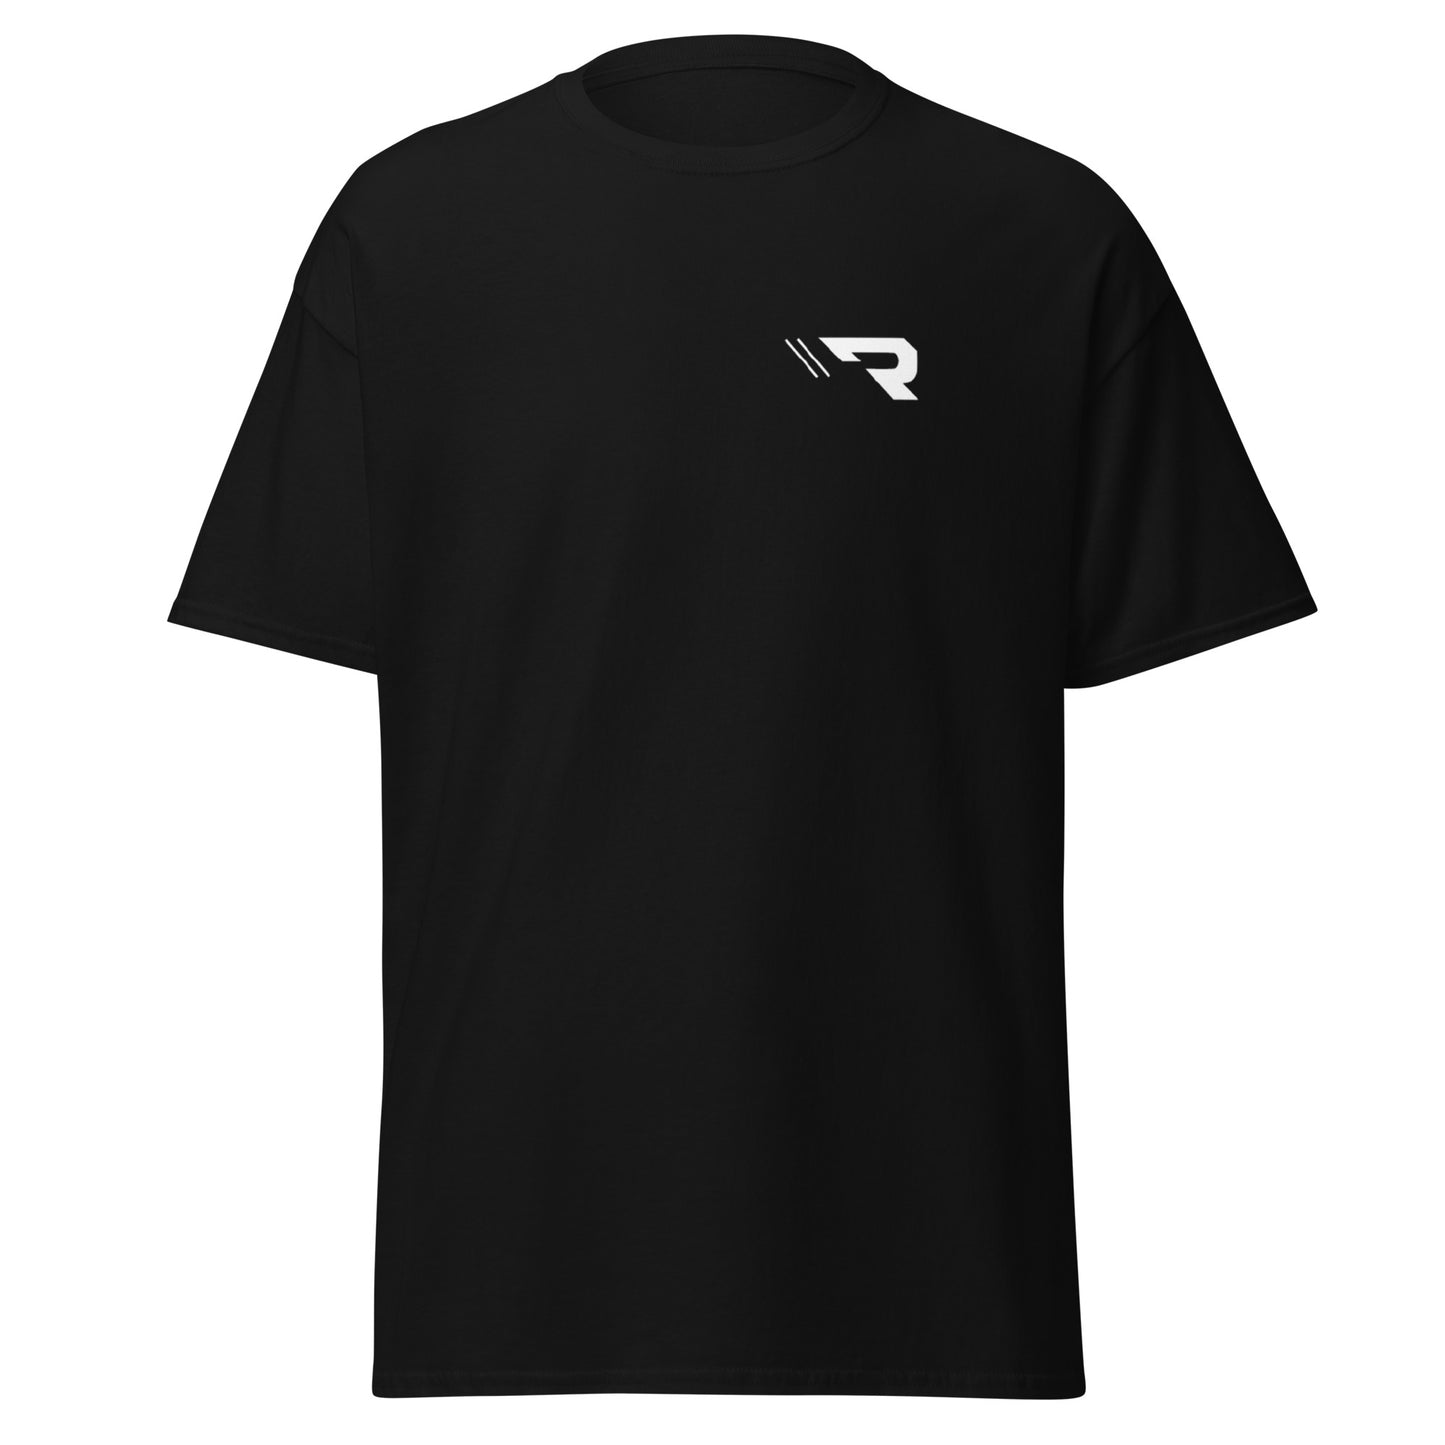 Russell Family Racing T-Shirt